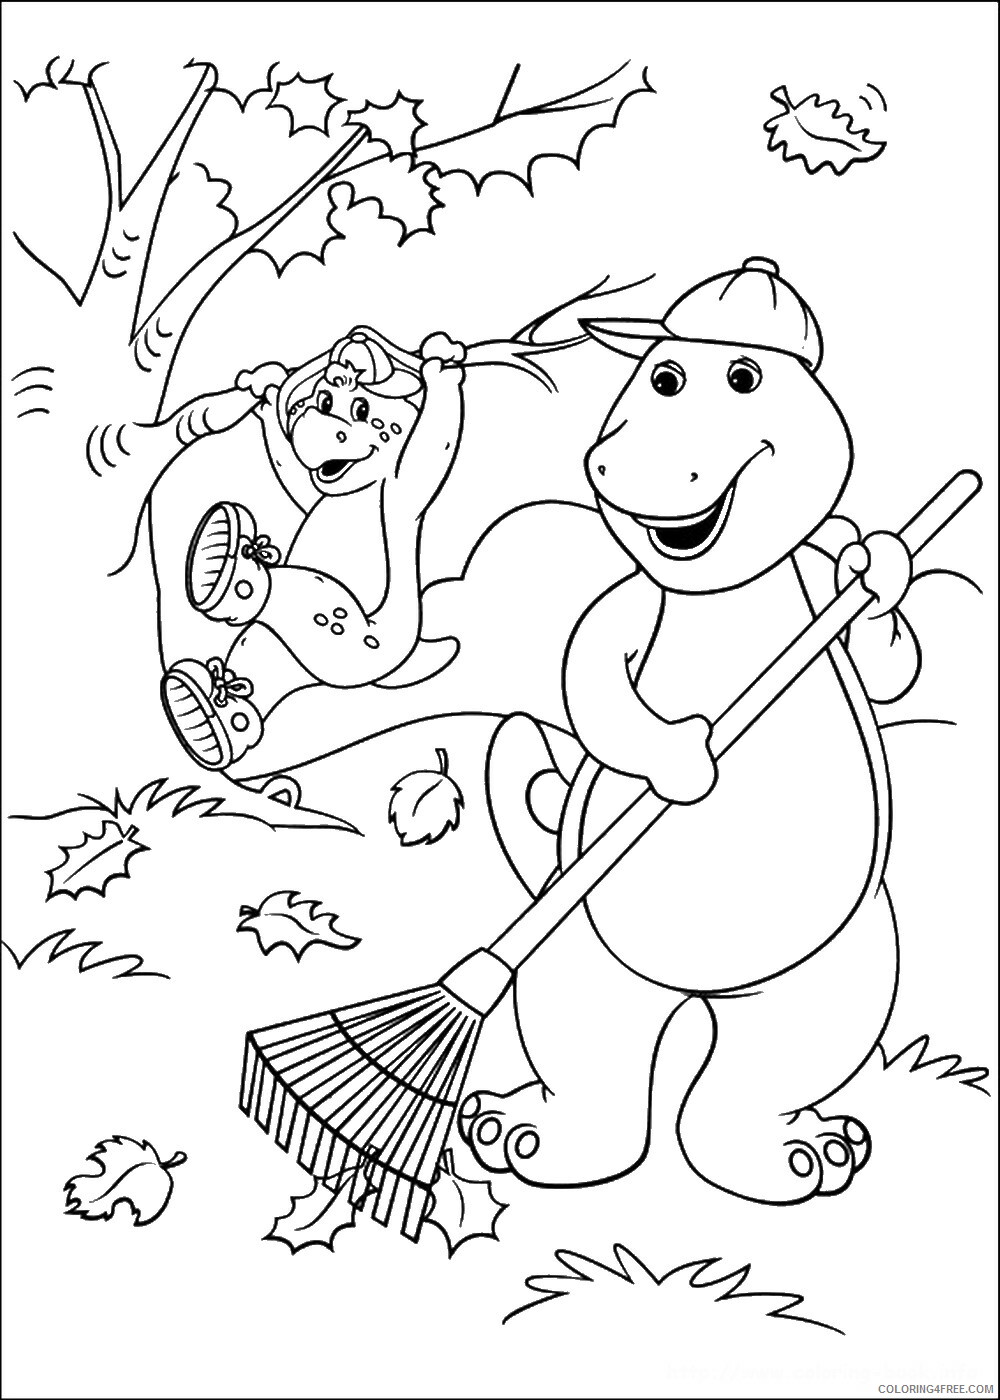 Barney and Friends Coloring Pages TV Film barney_cl_1046 Printable 2020 00619 Coloring4free